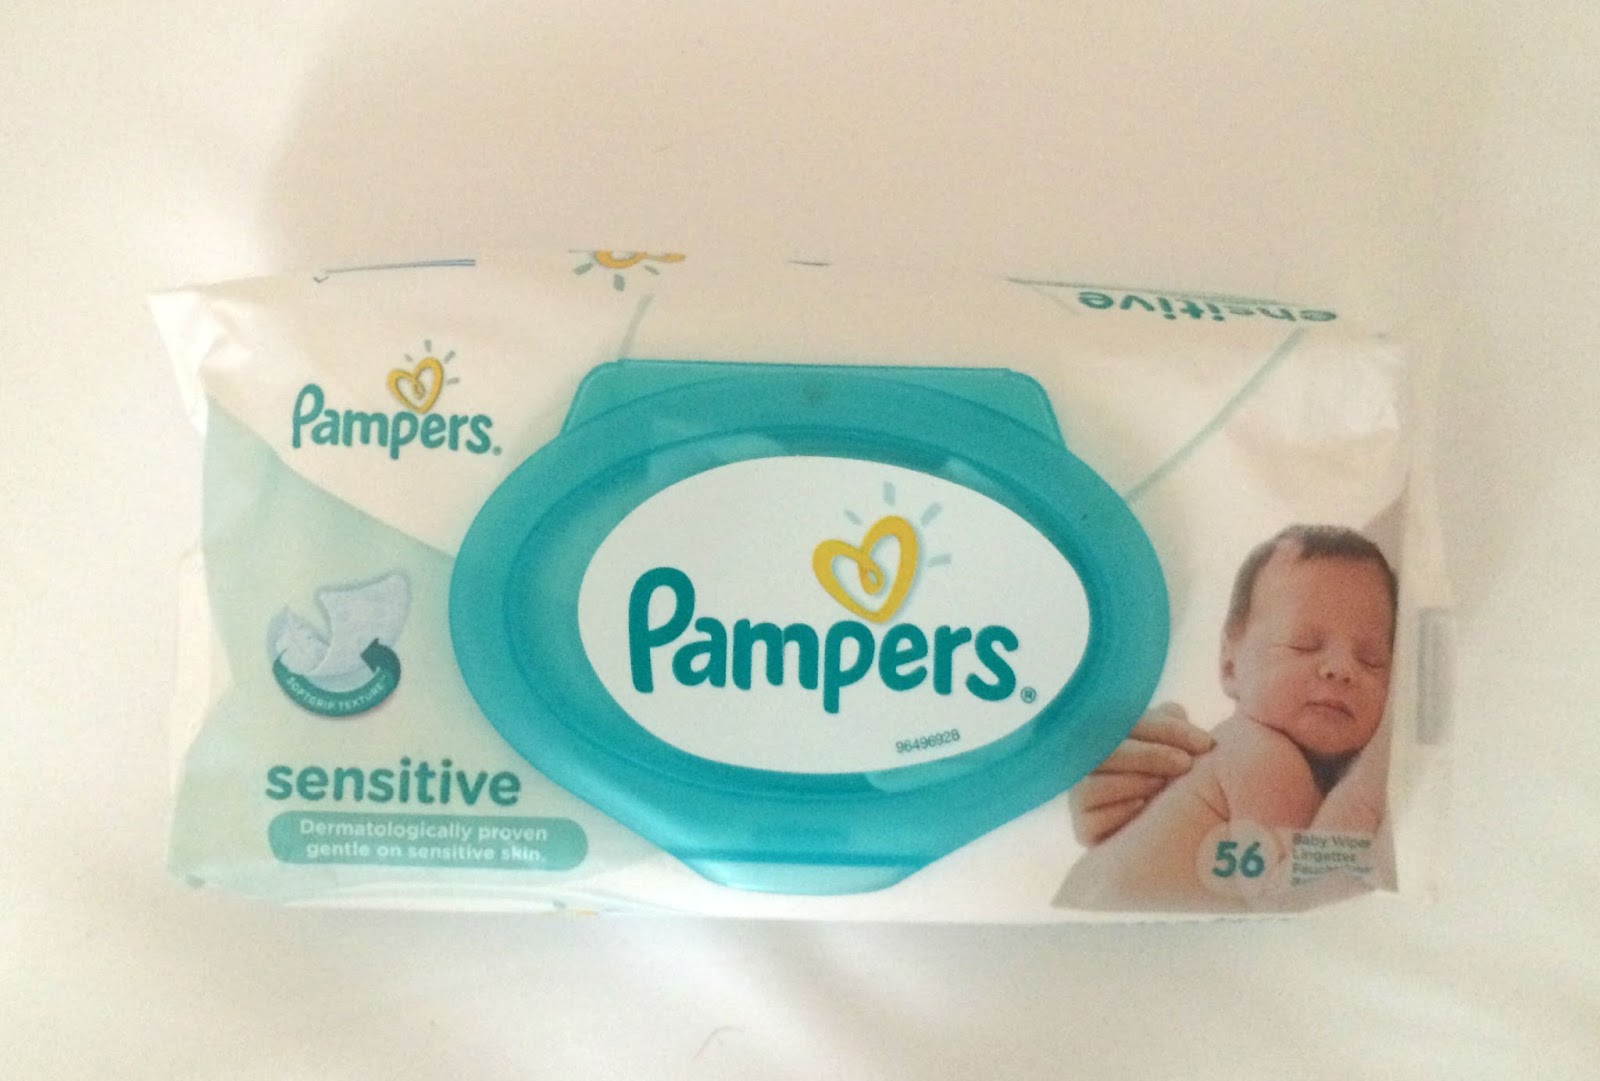 Pampers Helps Relieve One of Parents' Worst Diaper Fears With